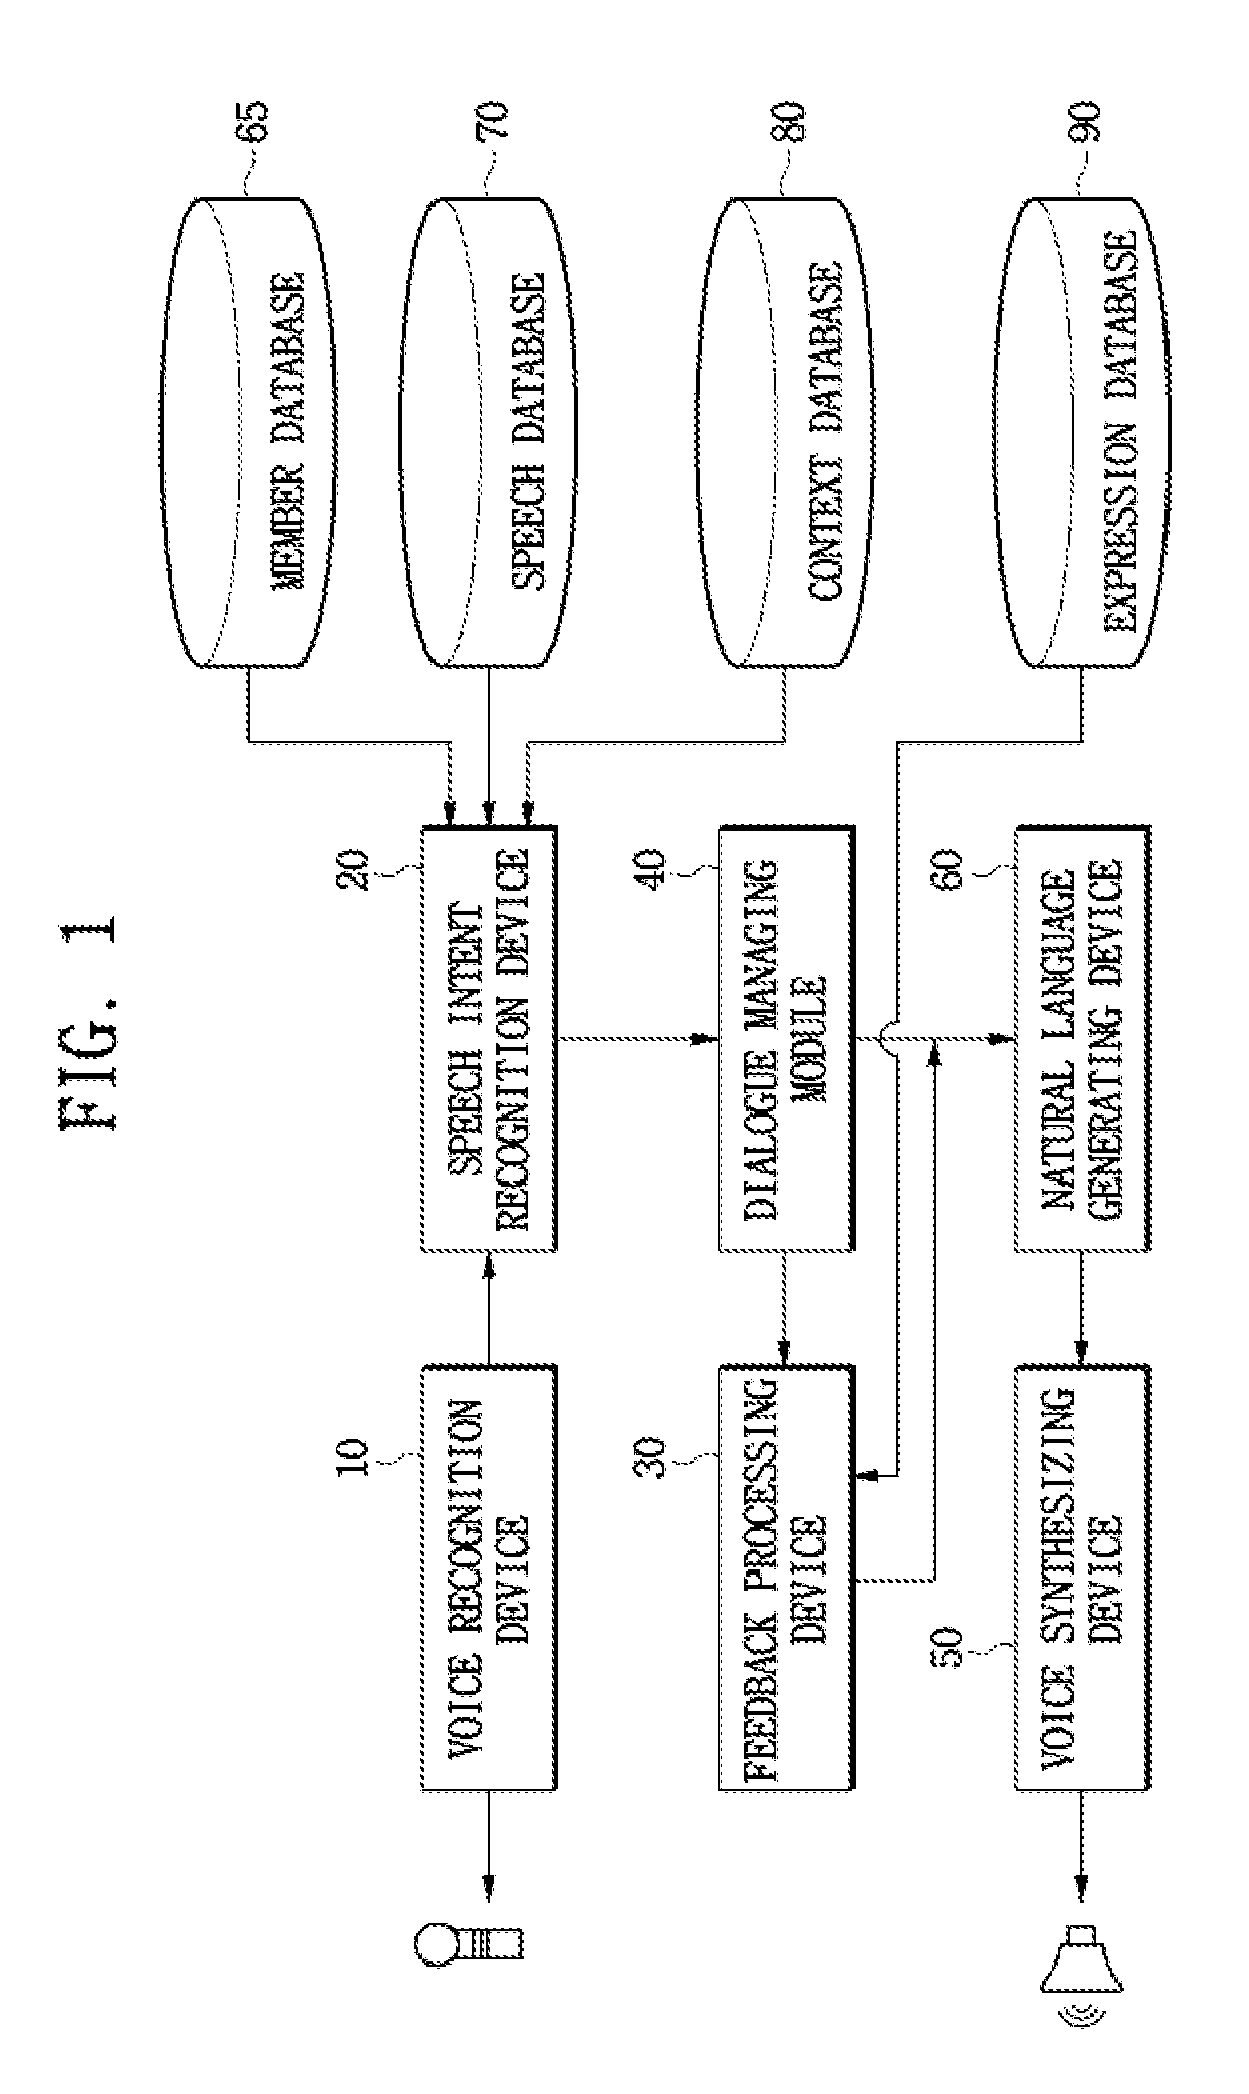 Apparatus and method for foreign language study